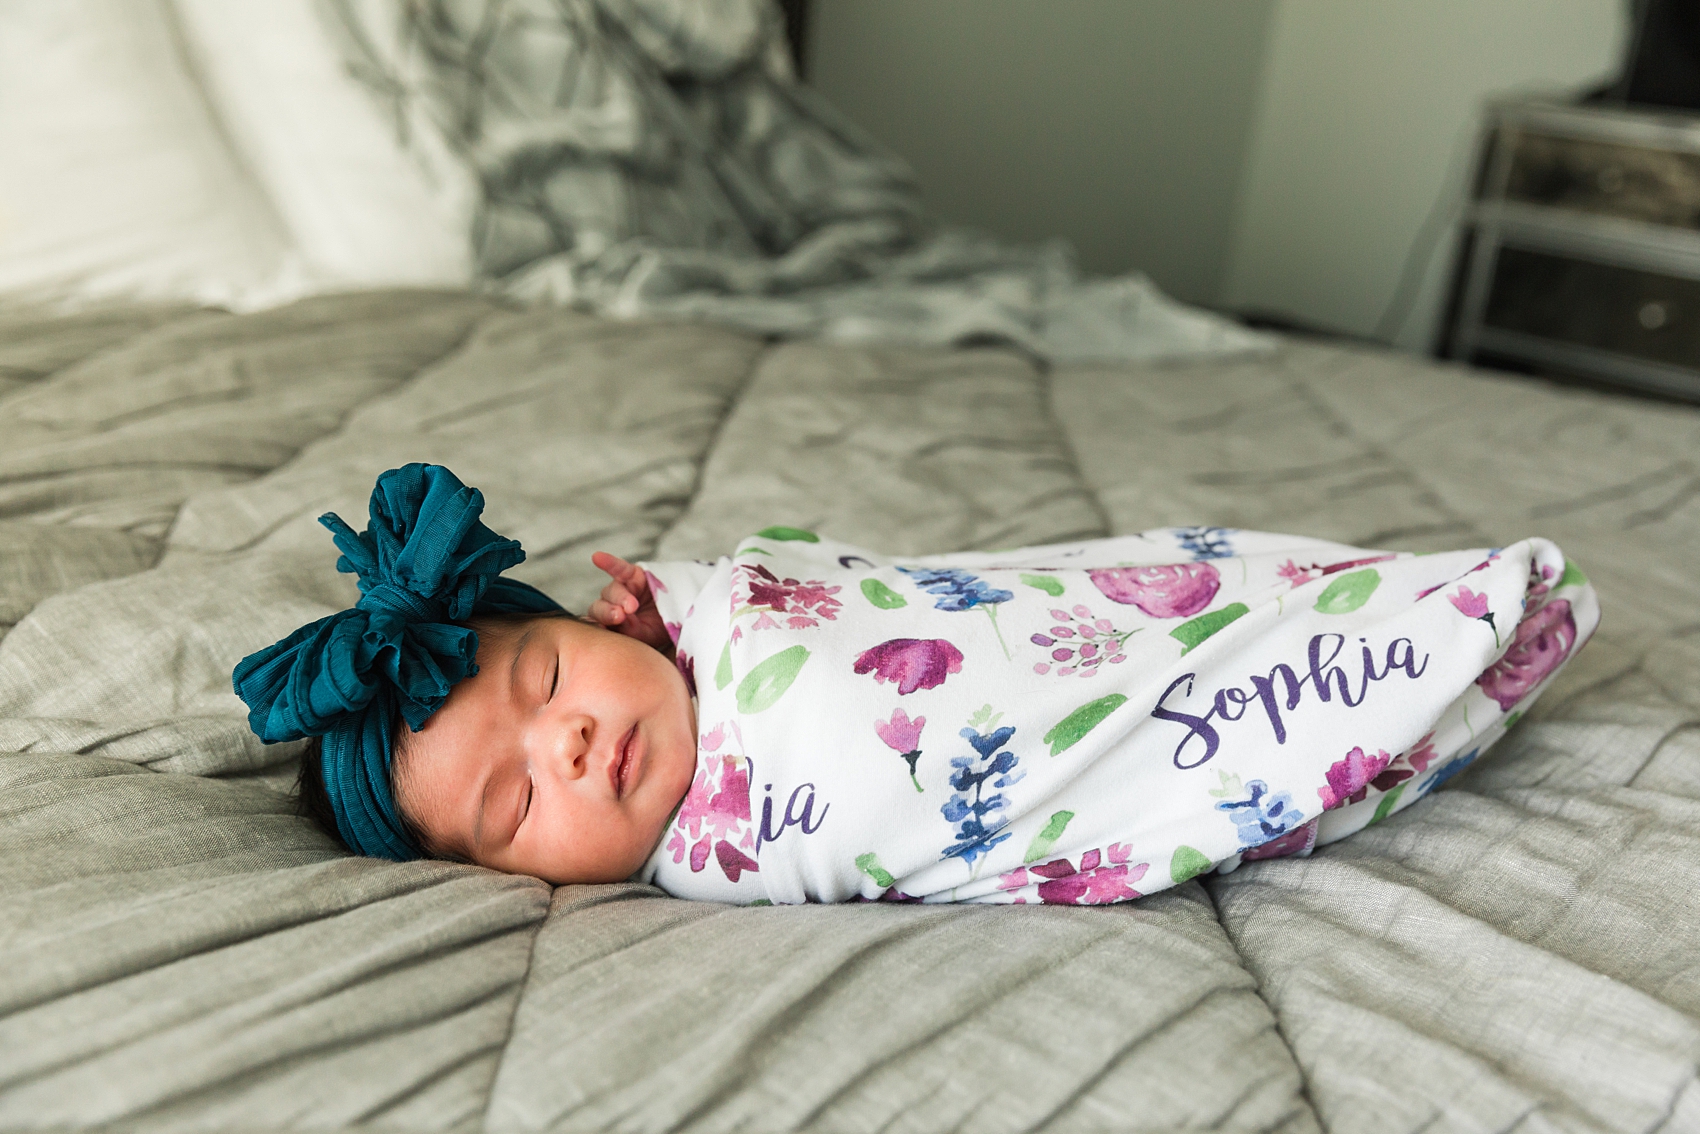 Leah Hope Photography | Scottsdale Phoenix Arizona | Newborn Pictures | Baby Photos | Family Pictures | Indoor Lifestyle Home Newborn Session